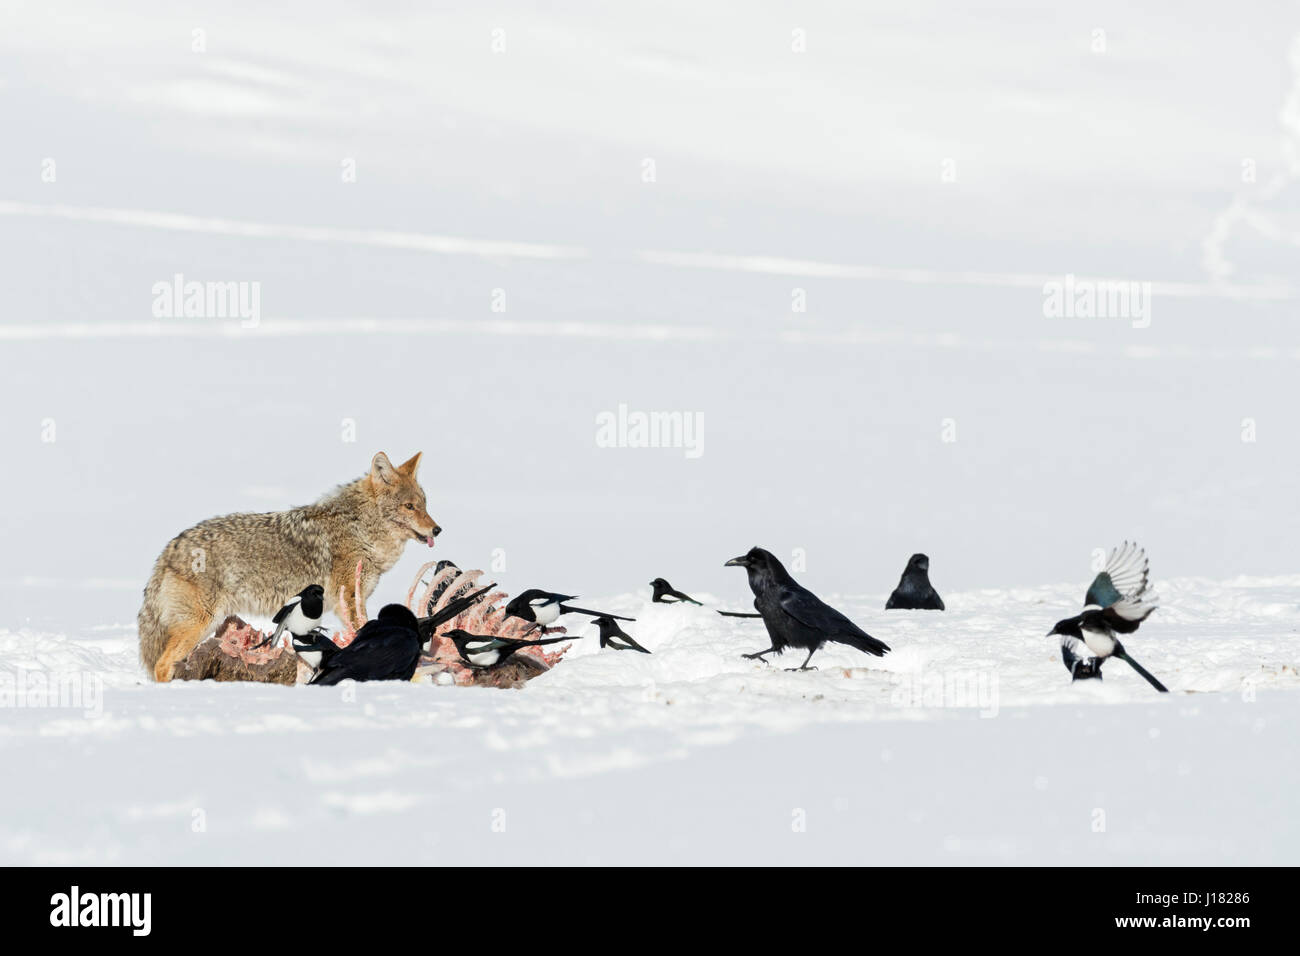 Coyote / Kojote ( Canis latrans ) at a carcass, defending it against magpies and ravens, in winter, high snow, Yellowstone NP, USA. Stock Photo